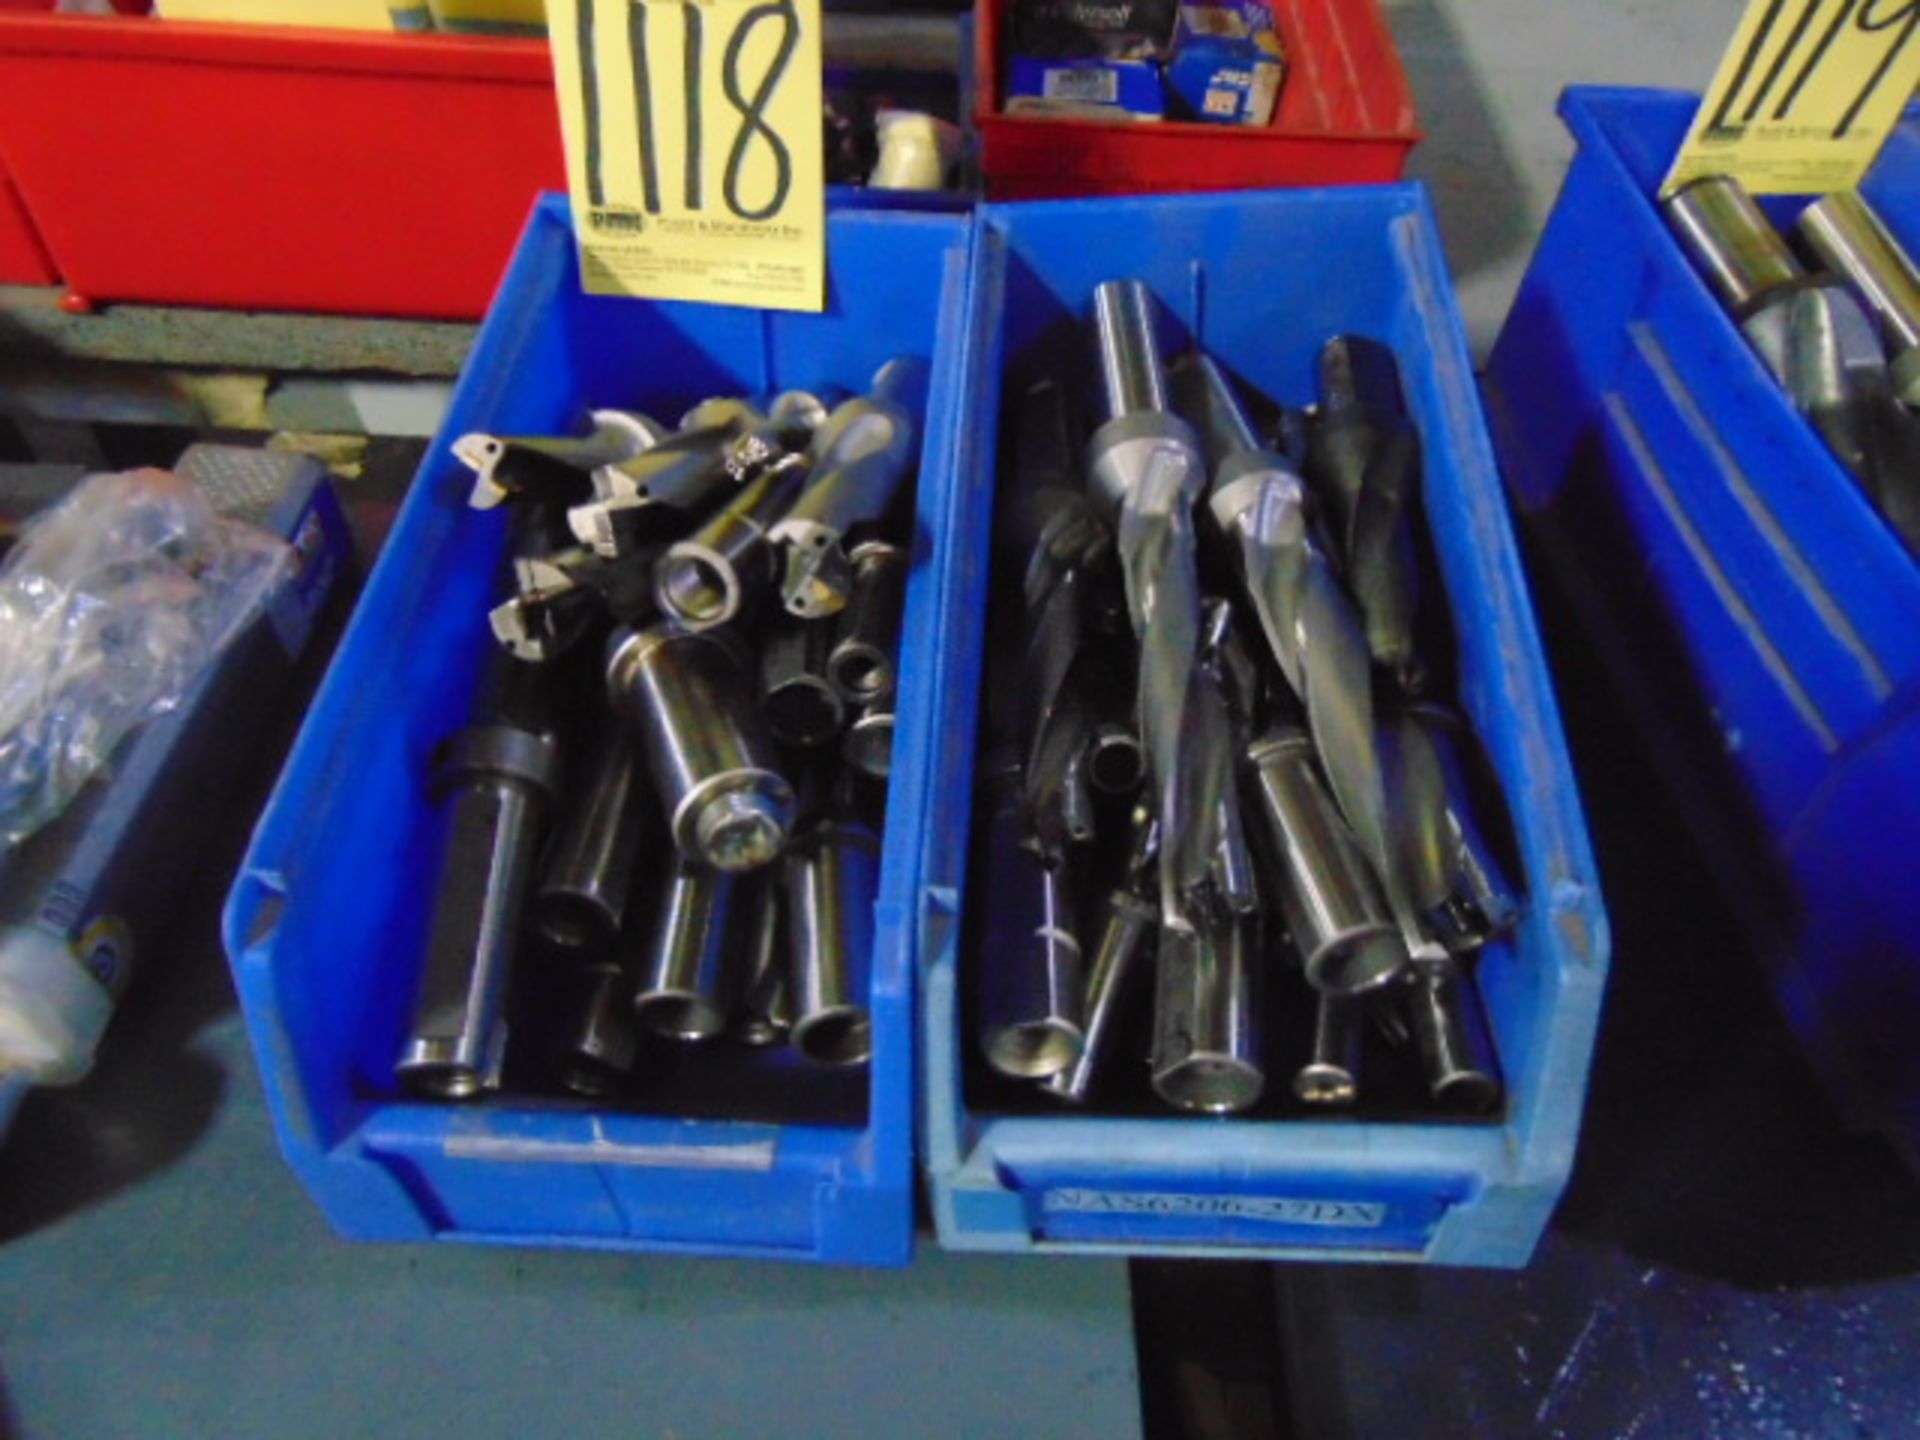 LOT OF INSERT DRILLS, assorted (in two boxes)